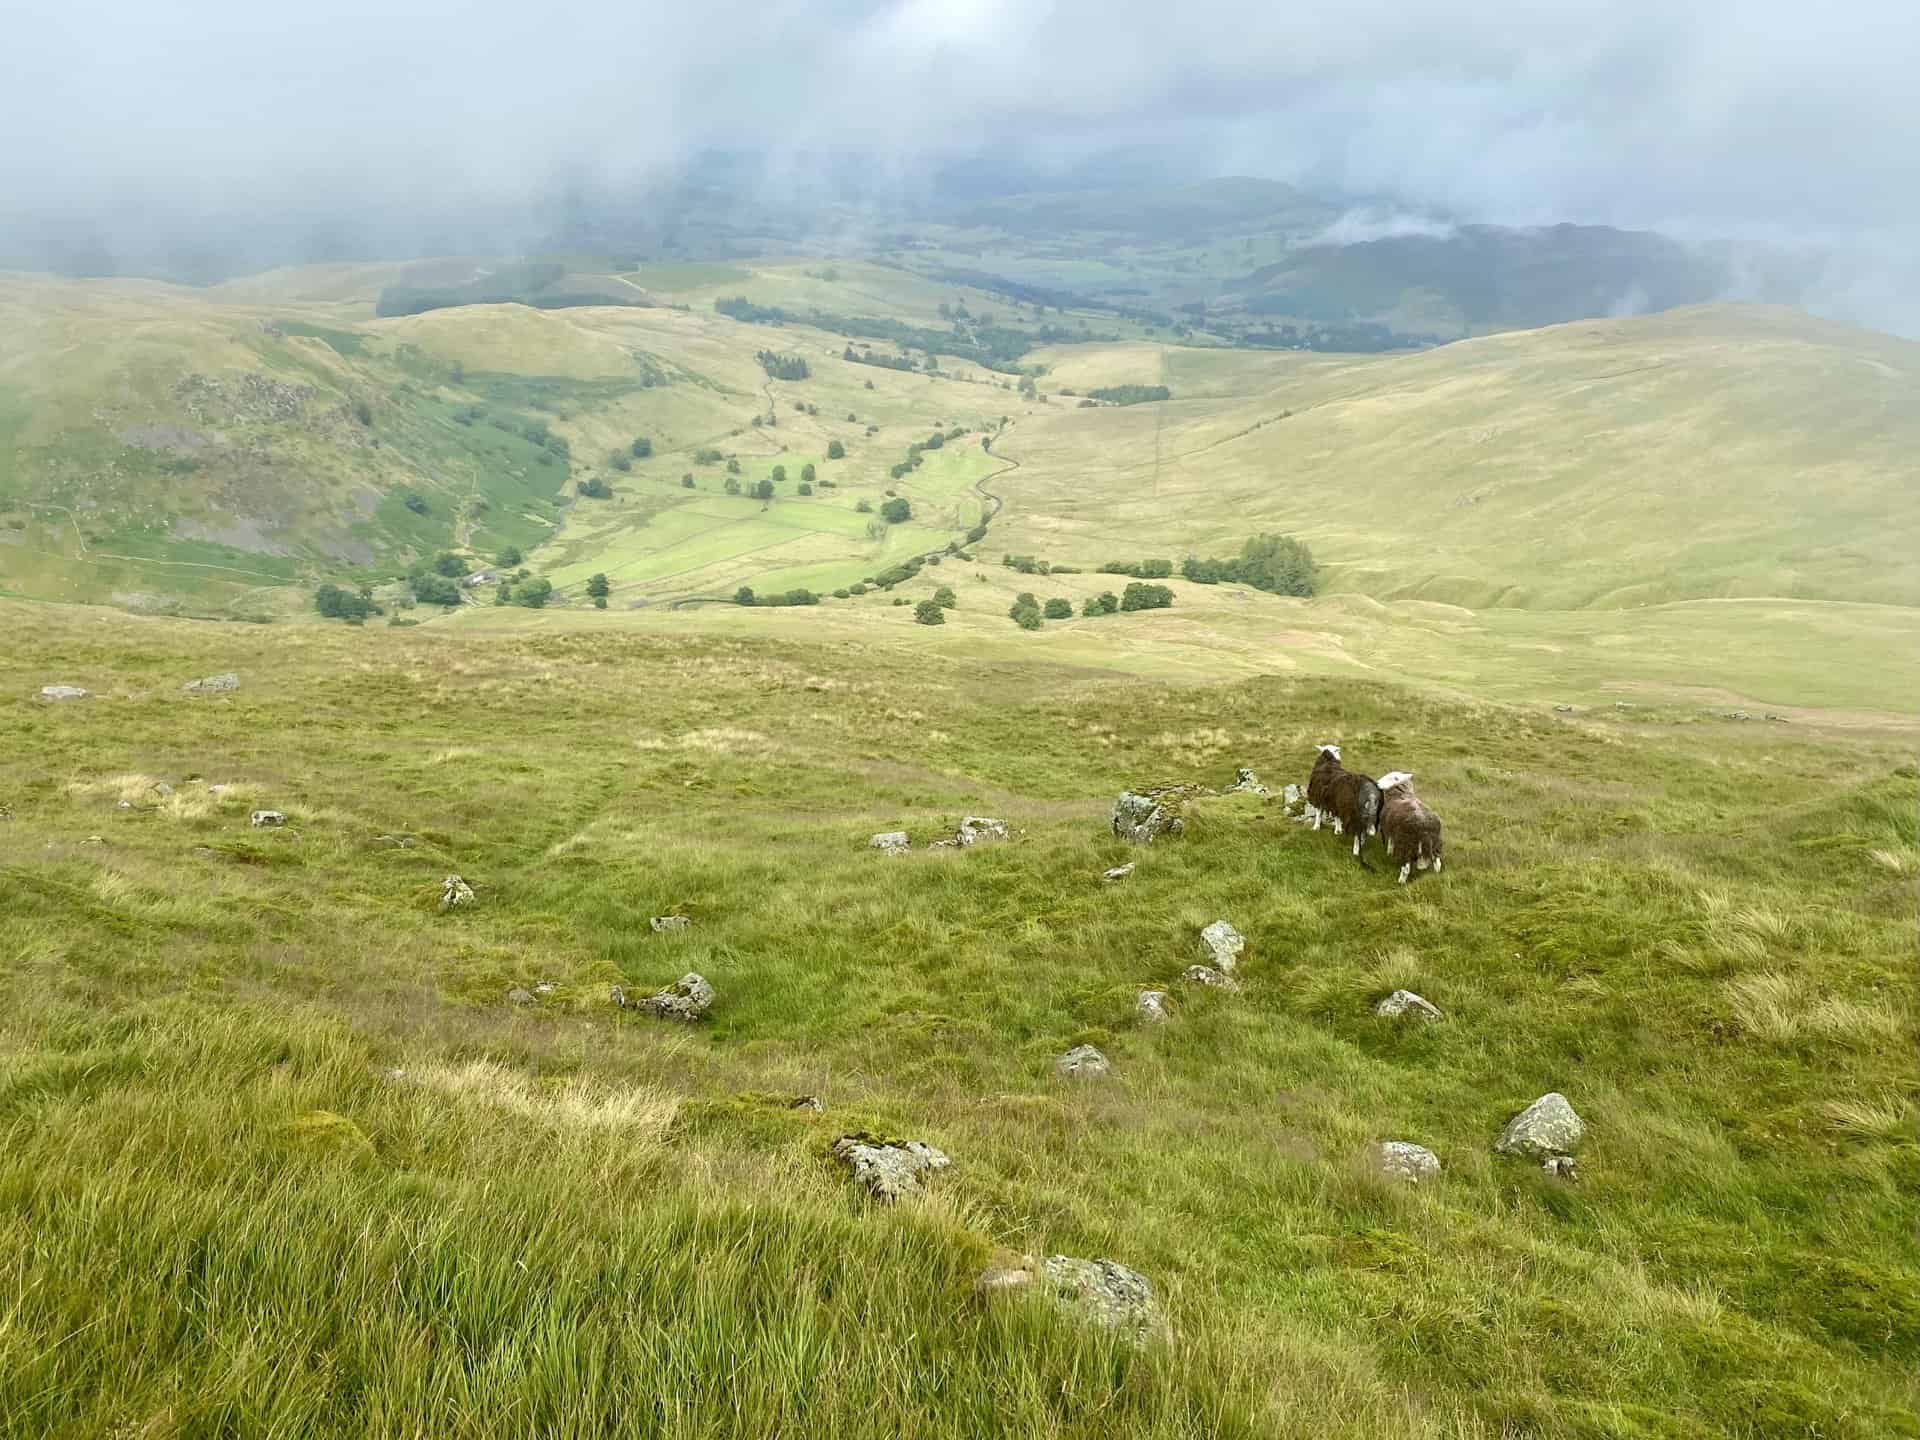 The view north-east down to the Dowthwaitehead / Aira Beck valley. About three quarters of the way round this Stybarrow Dodd walk.